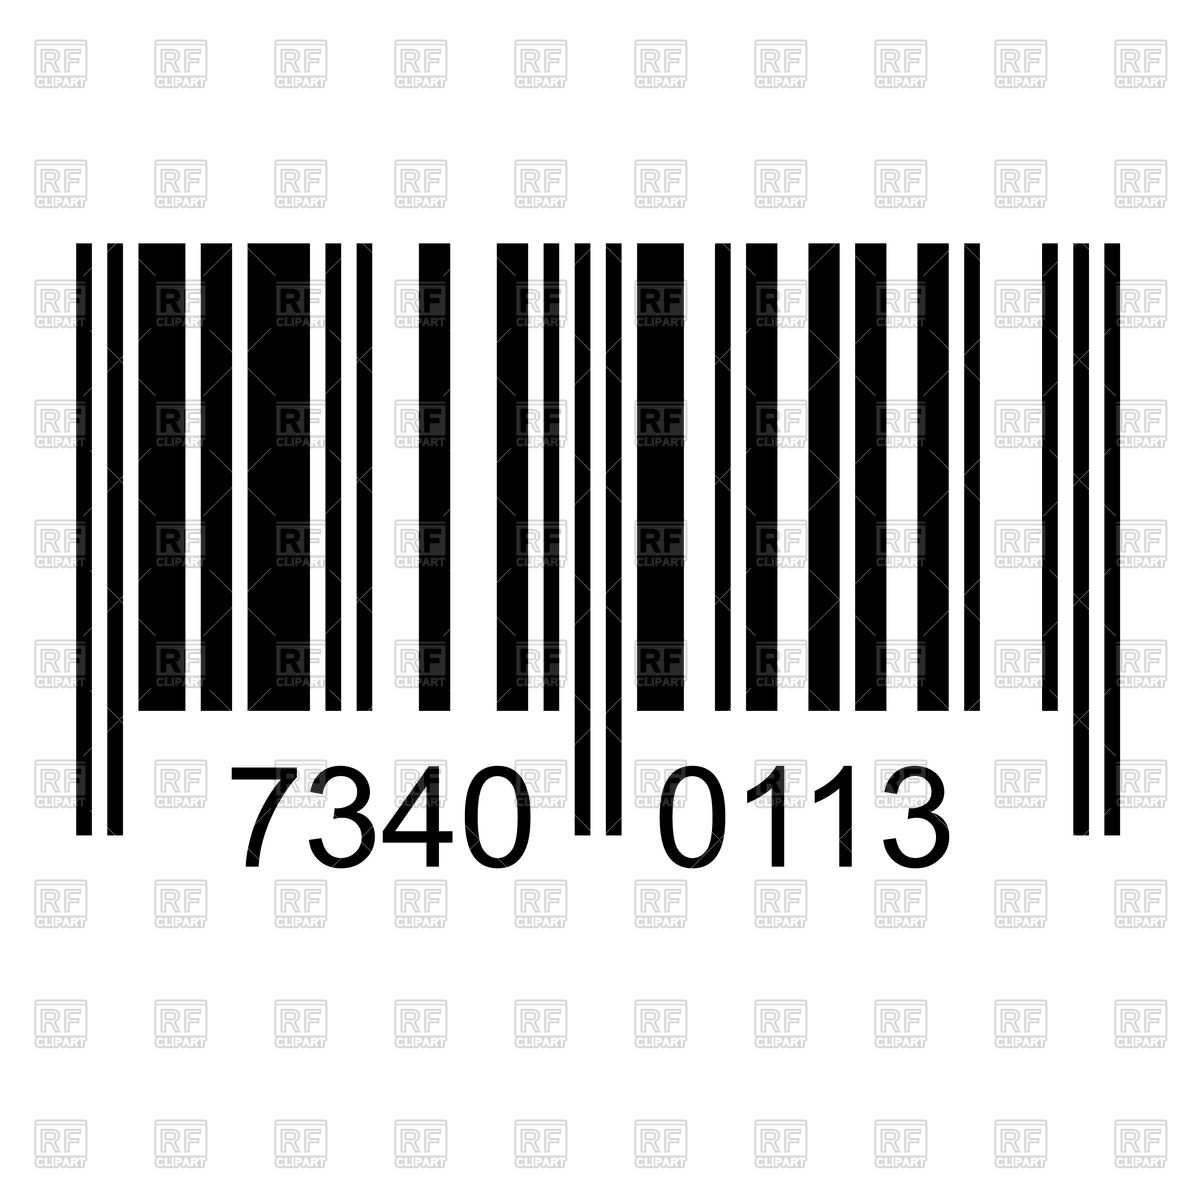 barcode computer science clipart